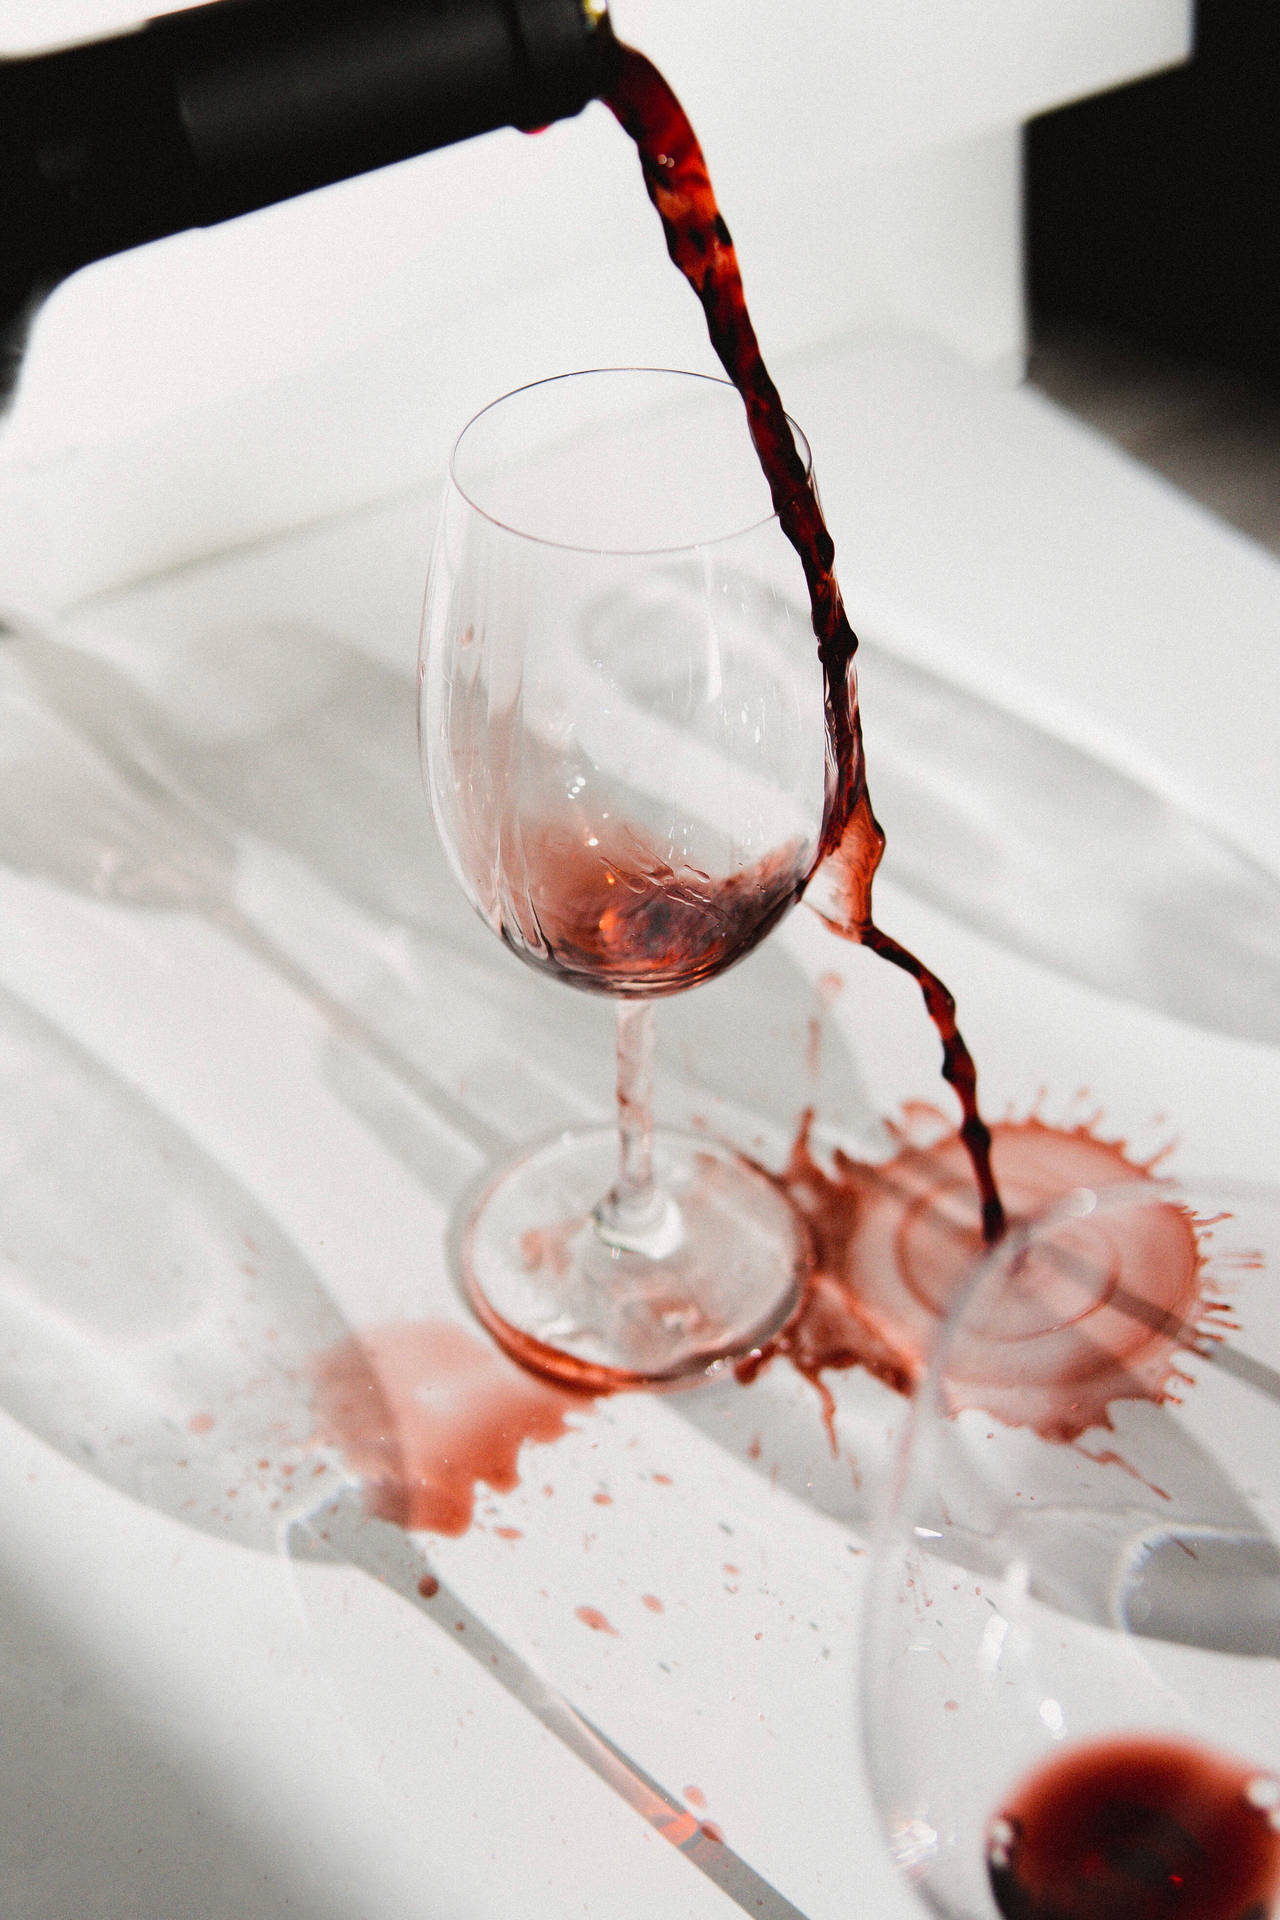 Spilled Red Wine Background